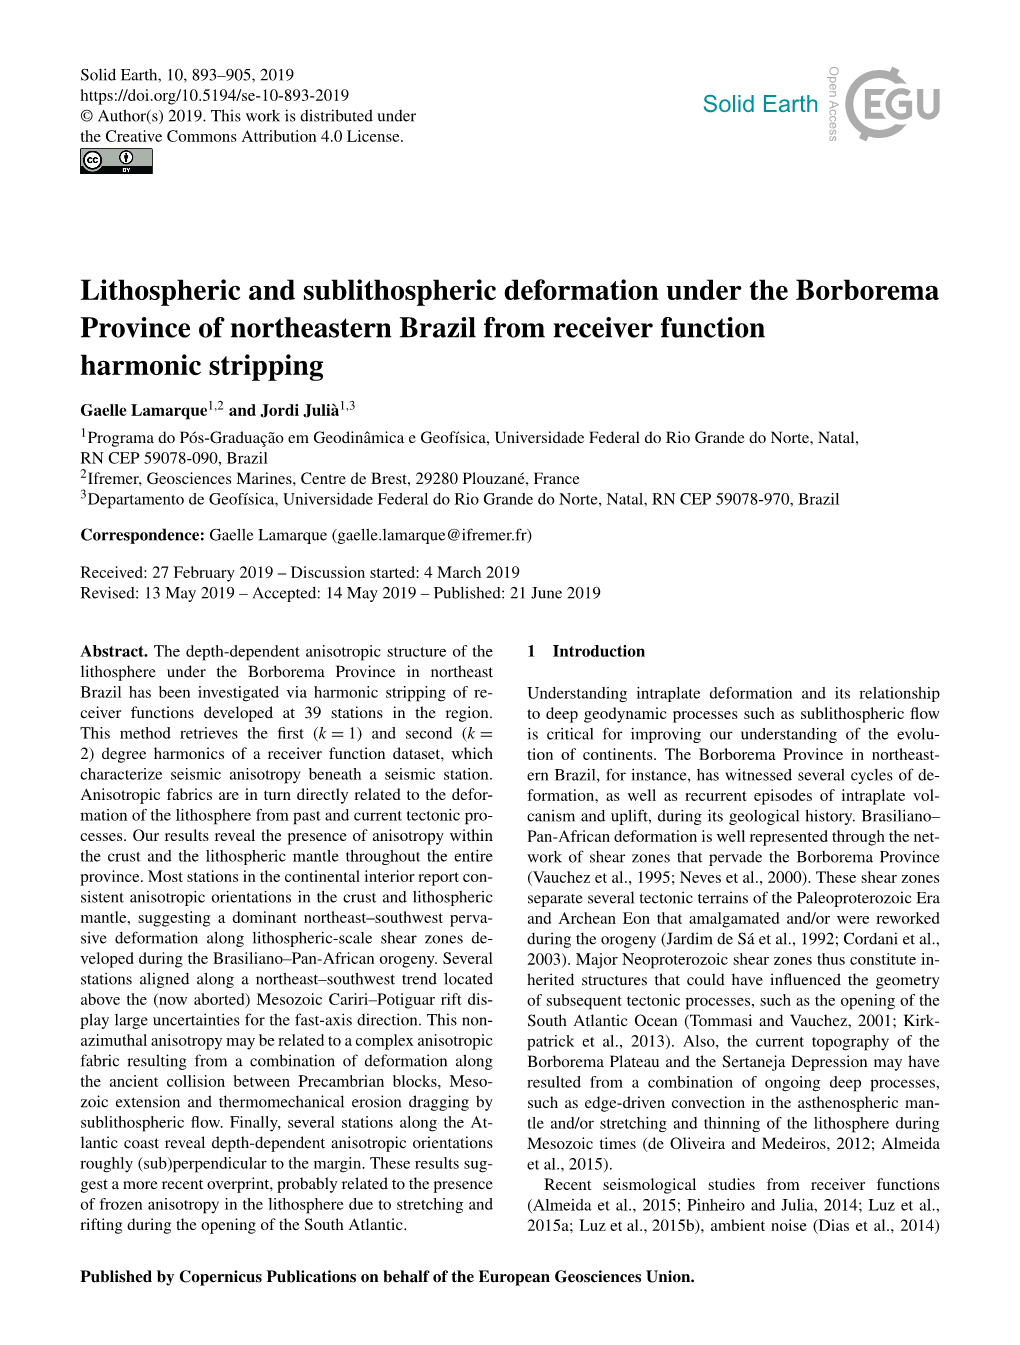 Lithospheric and Sublithospheric Deformation Under the Borborema Province of Northeastern Brazil from Receiver Function Harmonic Stripping